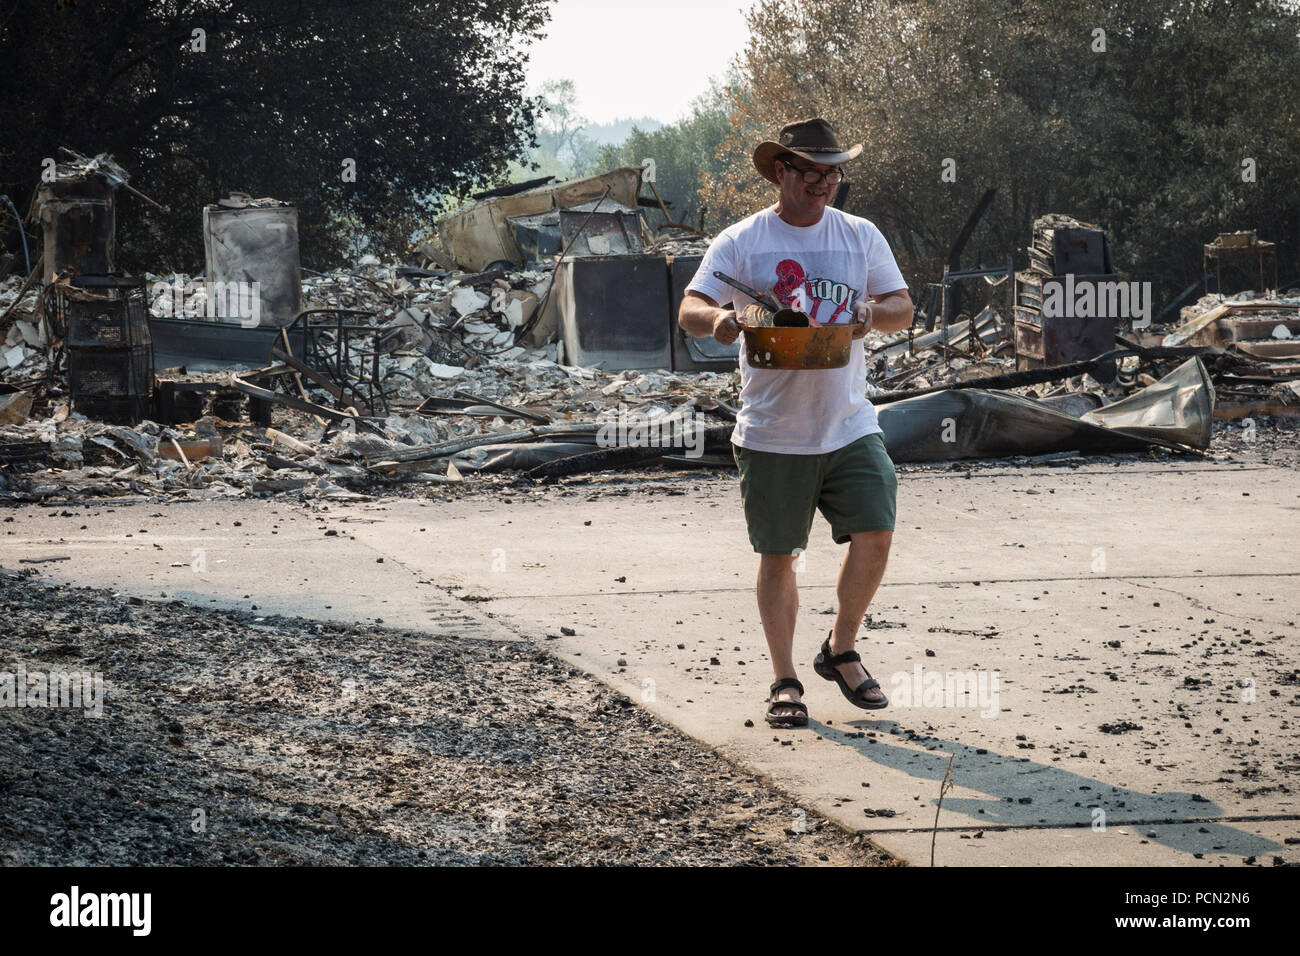 Redding, California, USA. 3rd Aug, 2018. Friday, August 3, 2018.ALISTAIR SULLIVAN pulls items from the remnants of his home that burned in the Carr Fire. Sullivan, who has lived in the Lake Redding Estates area of Redding, California, for approximately three years, remained optimistic. He's currently staying in a local hotel and has set up a fundraising page on Facebook to help defray some of the costs needed to rebuild. Credit: Tracy Barbutes/ZUMA Wire/Alamy Live News Stock Photo